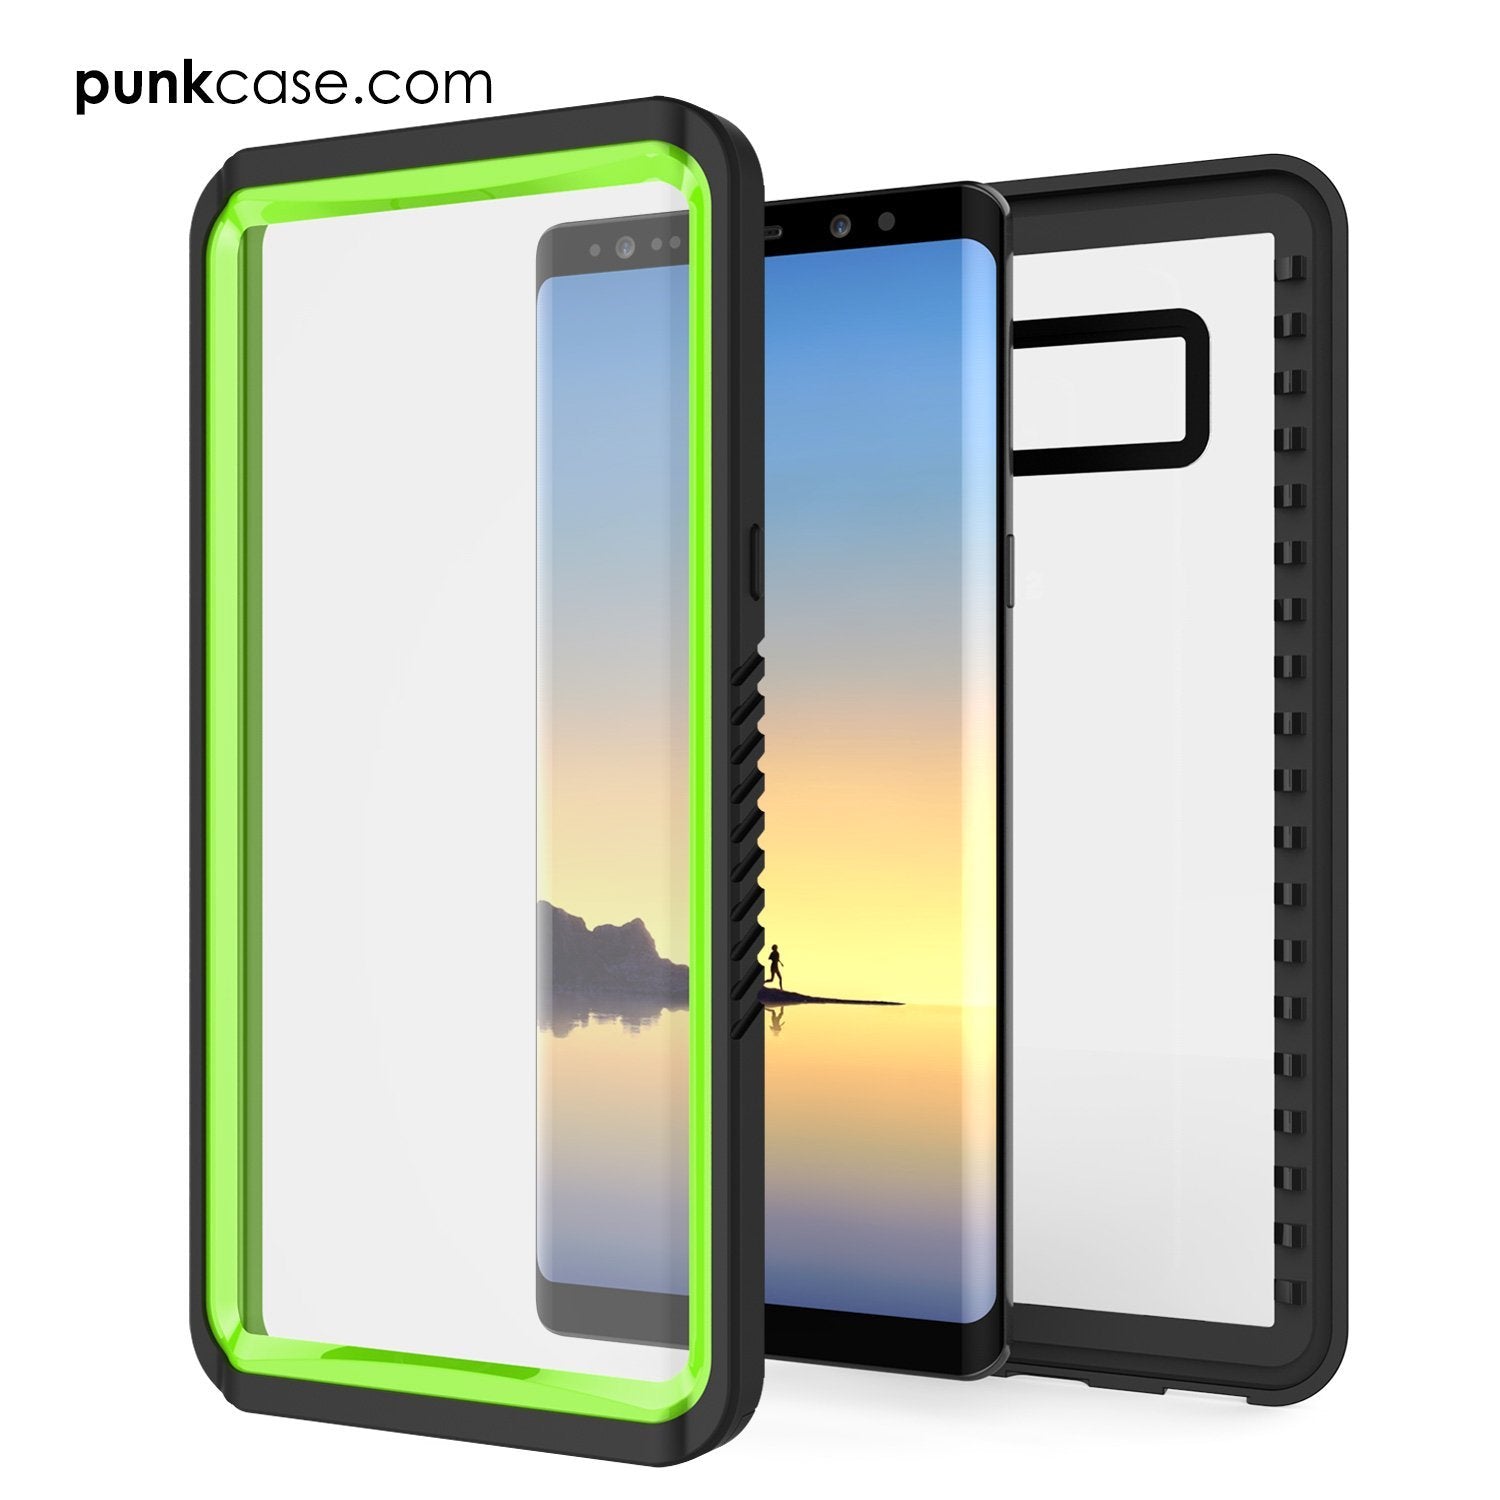 Galaxy Note 8 Case, Punkcase [Extreme Series] [Slim Fit] [IP68 Certified] [Shockproof] Armor Cover W/ Built In Screen Protector [Light Green] - PunkCase NZ